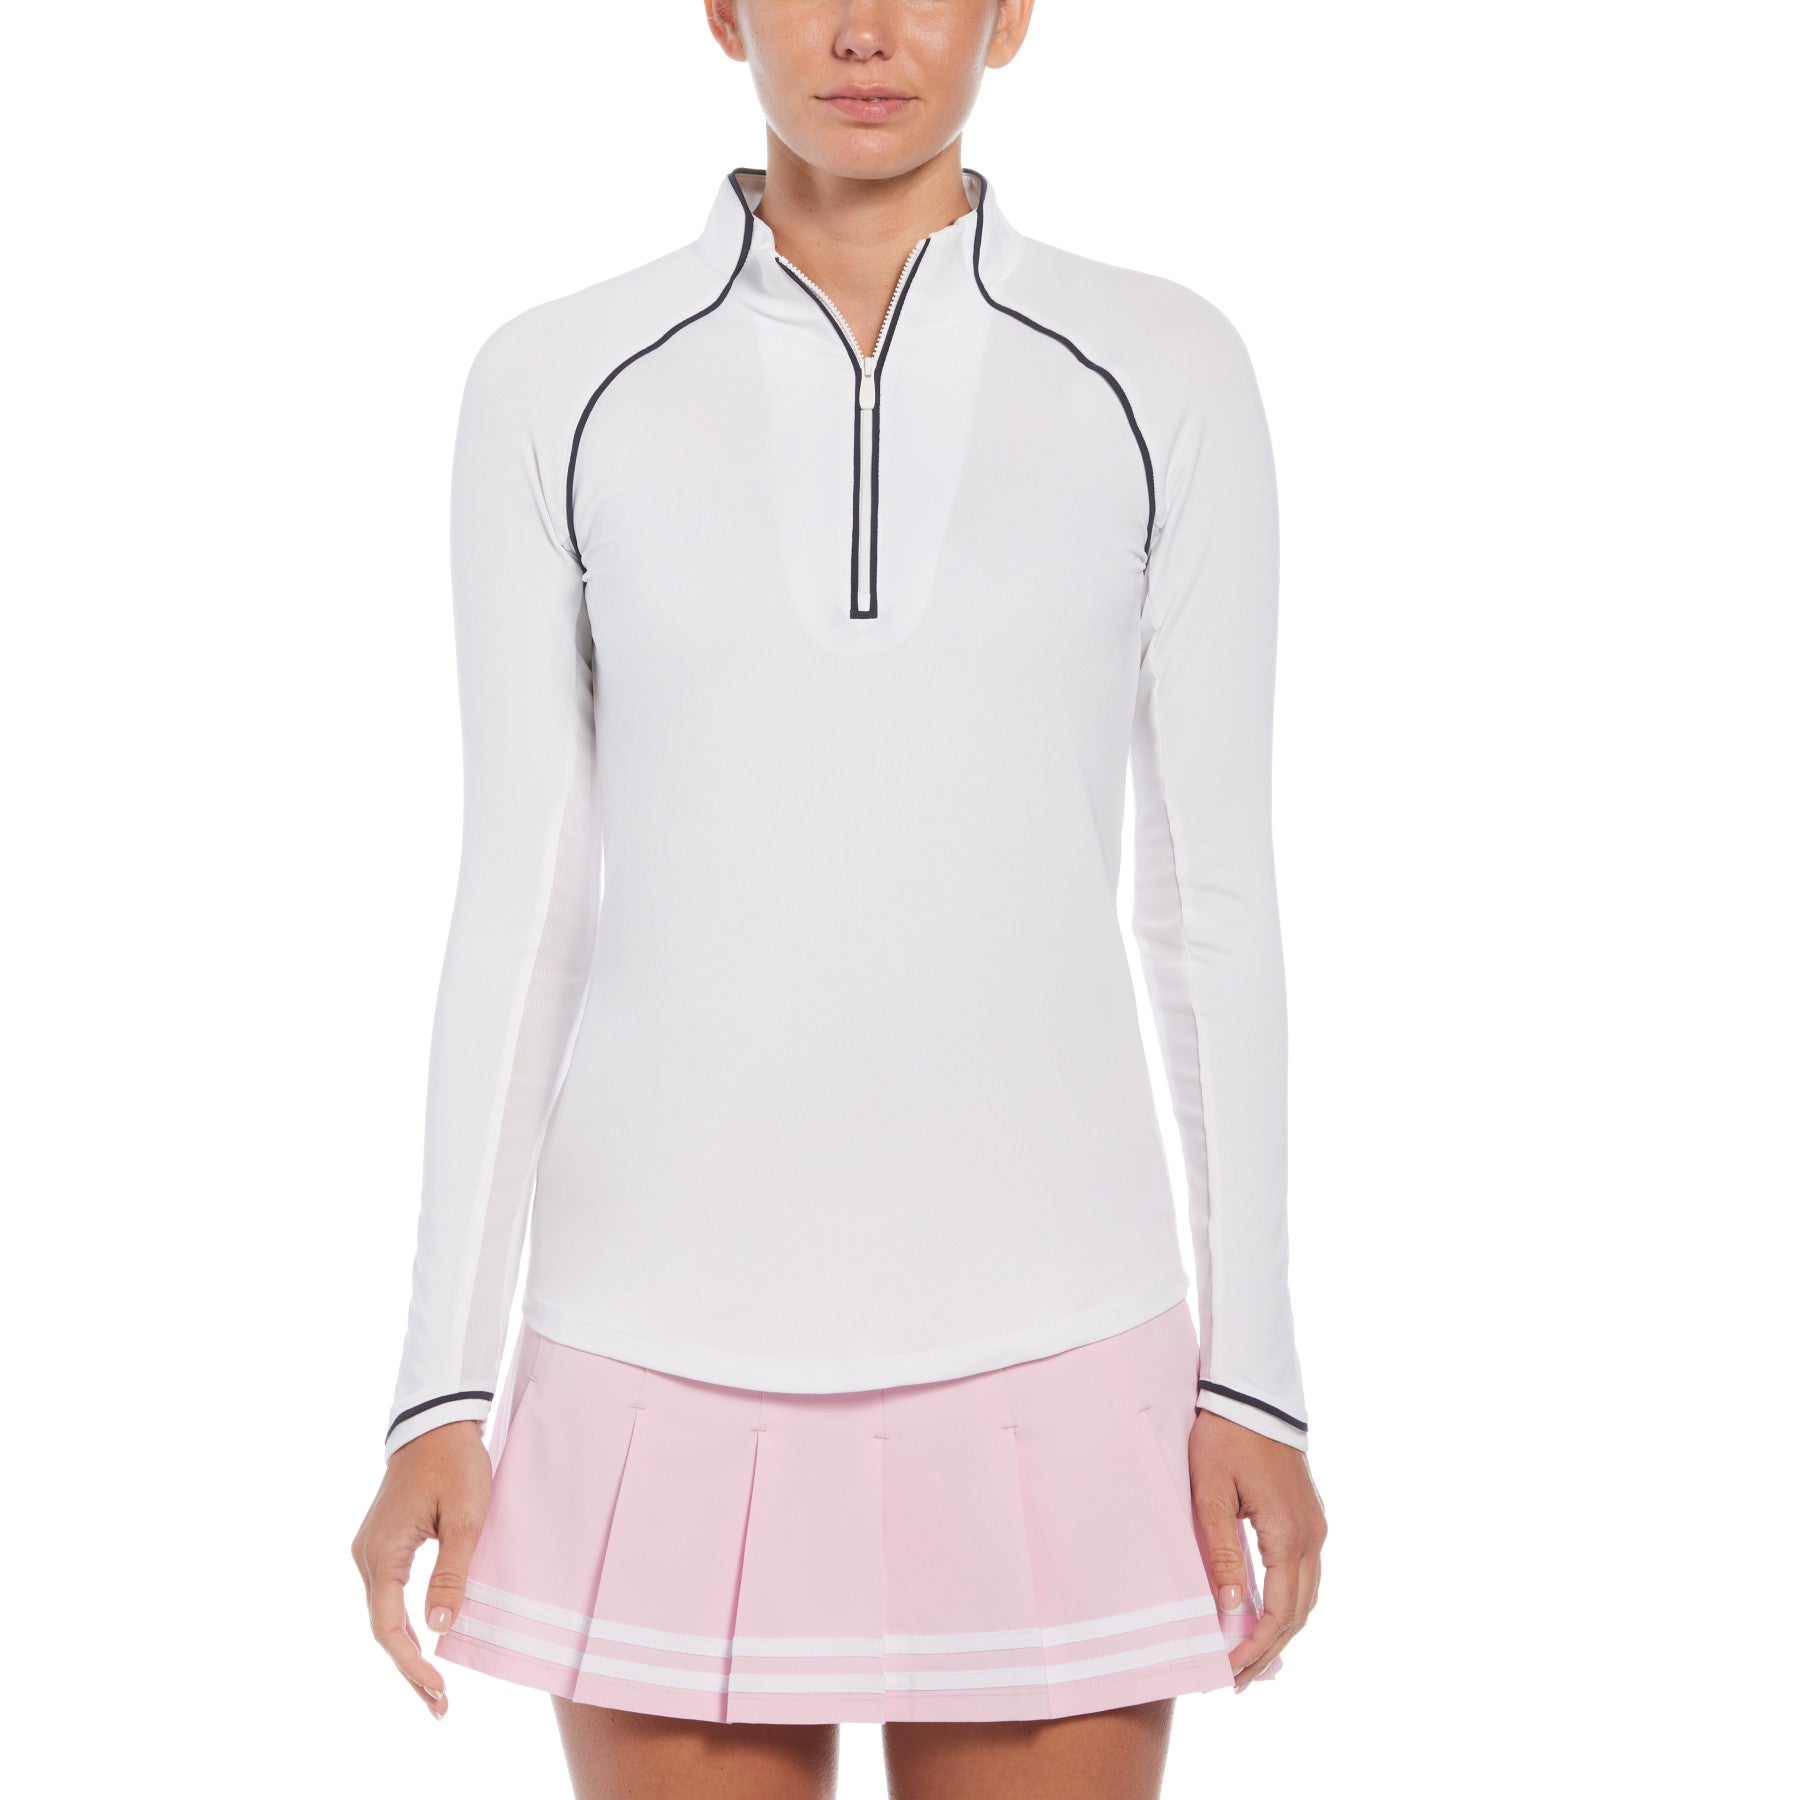 View Womens Tennis Quarter Zip Long Sleeve In Bright White information